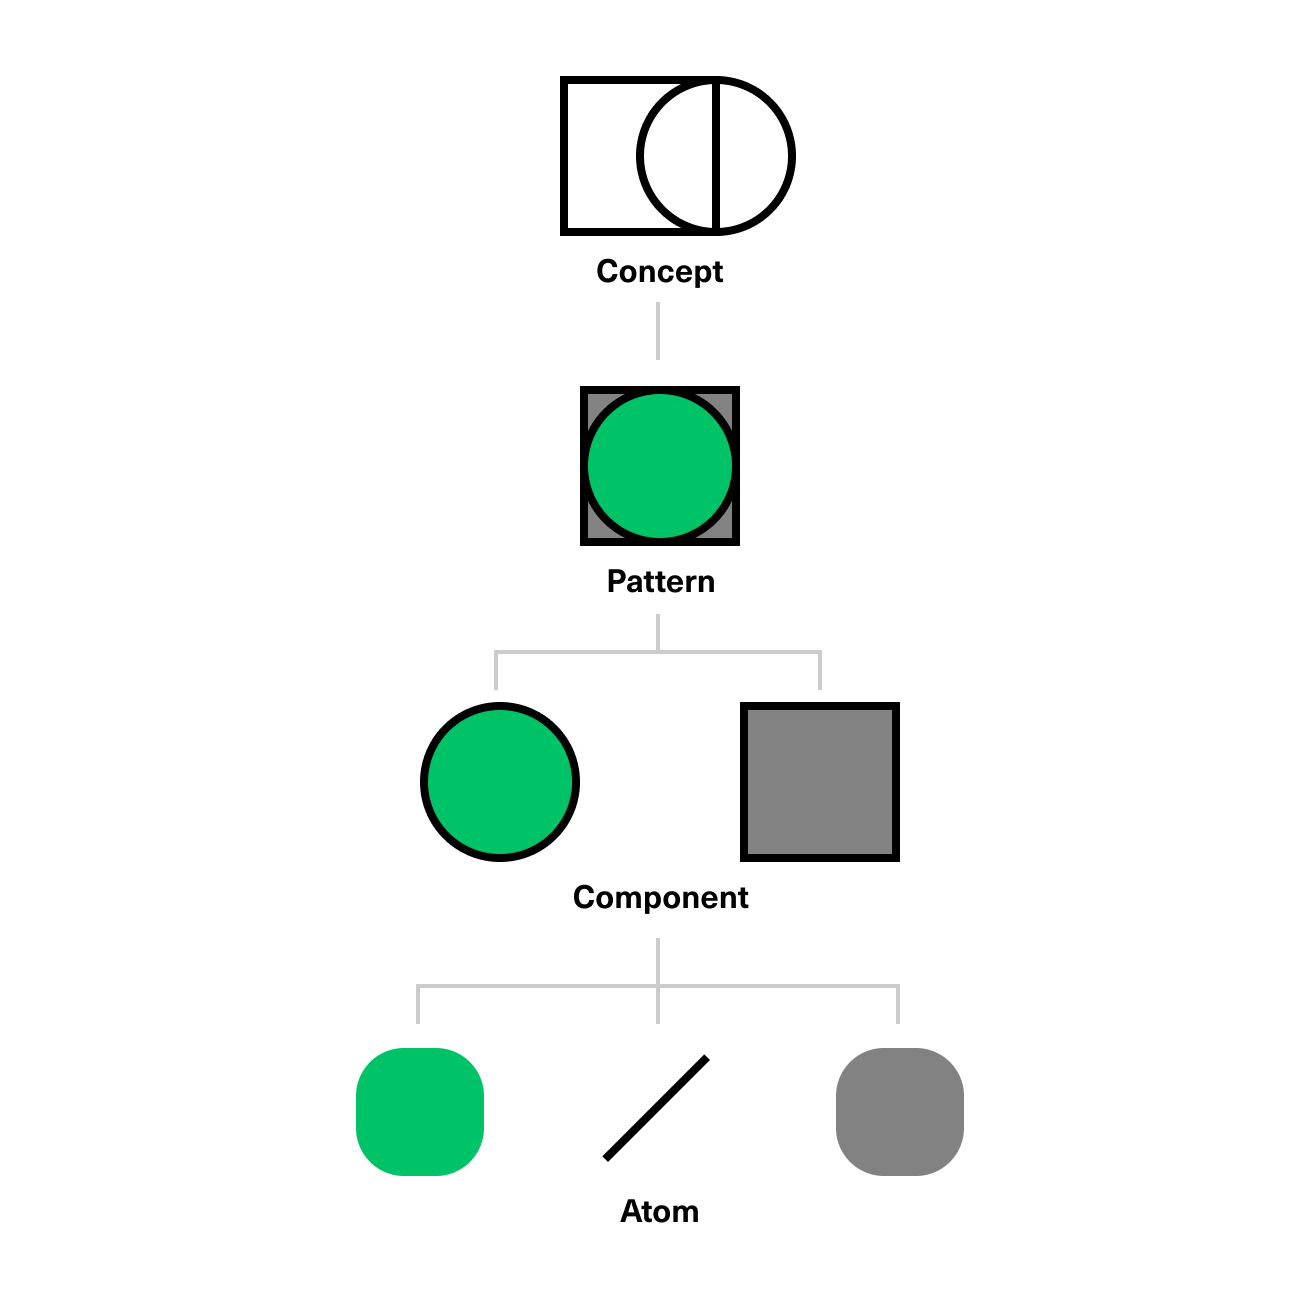 A diagram of the structural elements of a design system